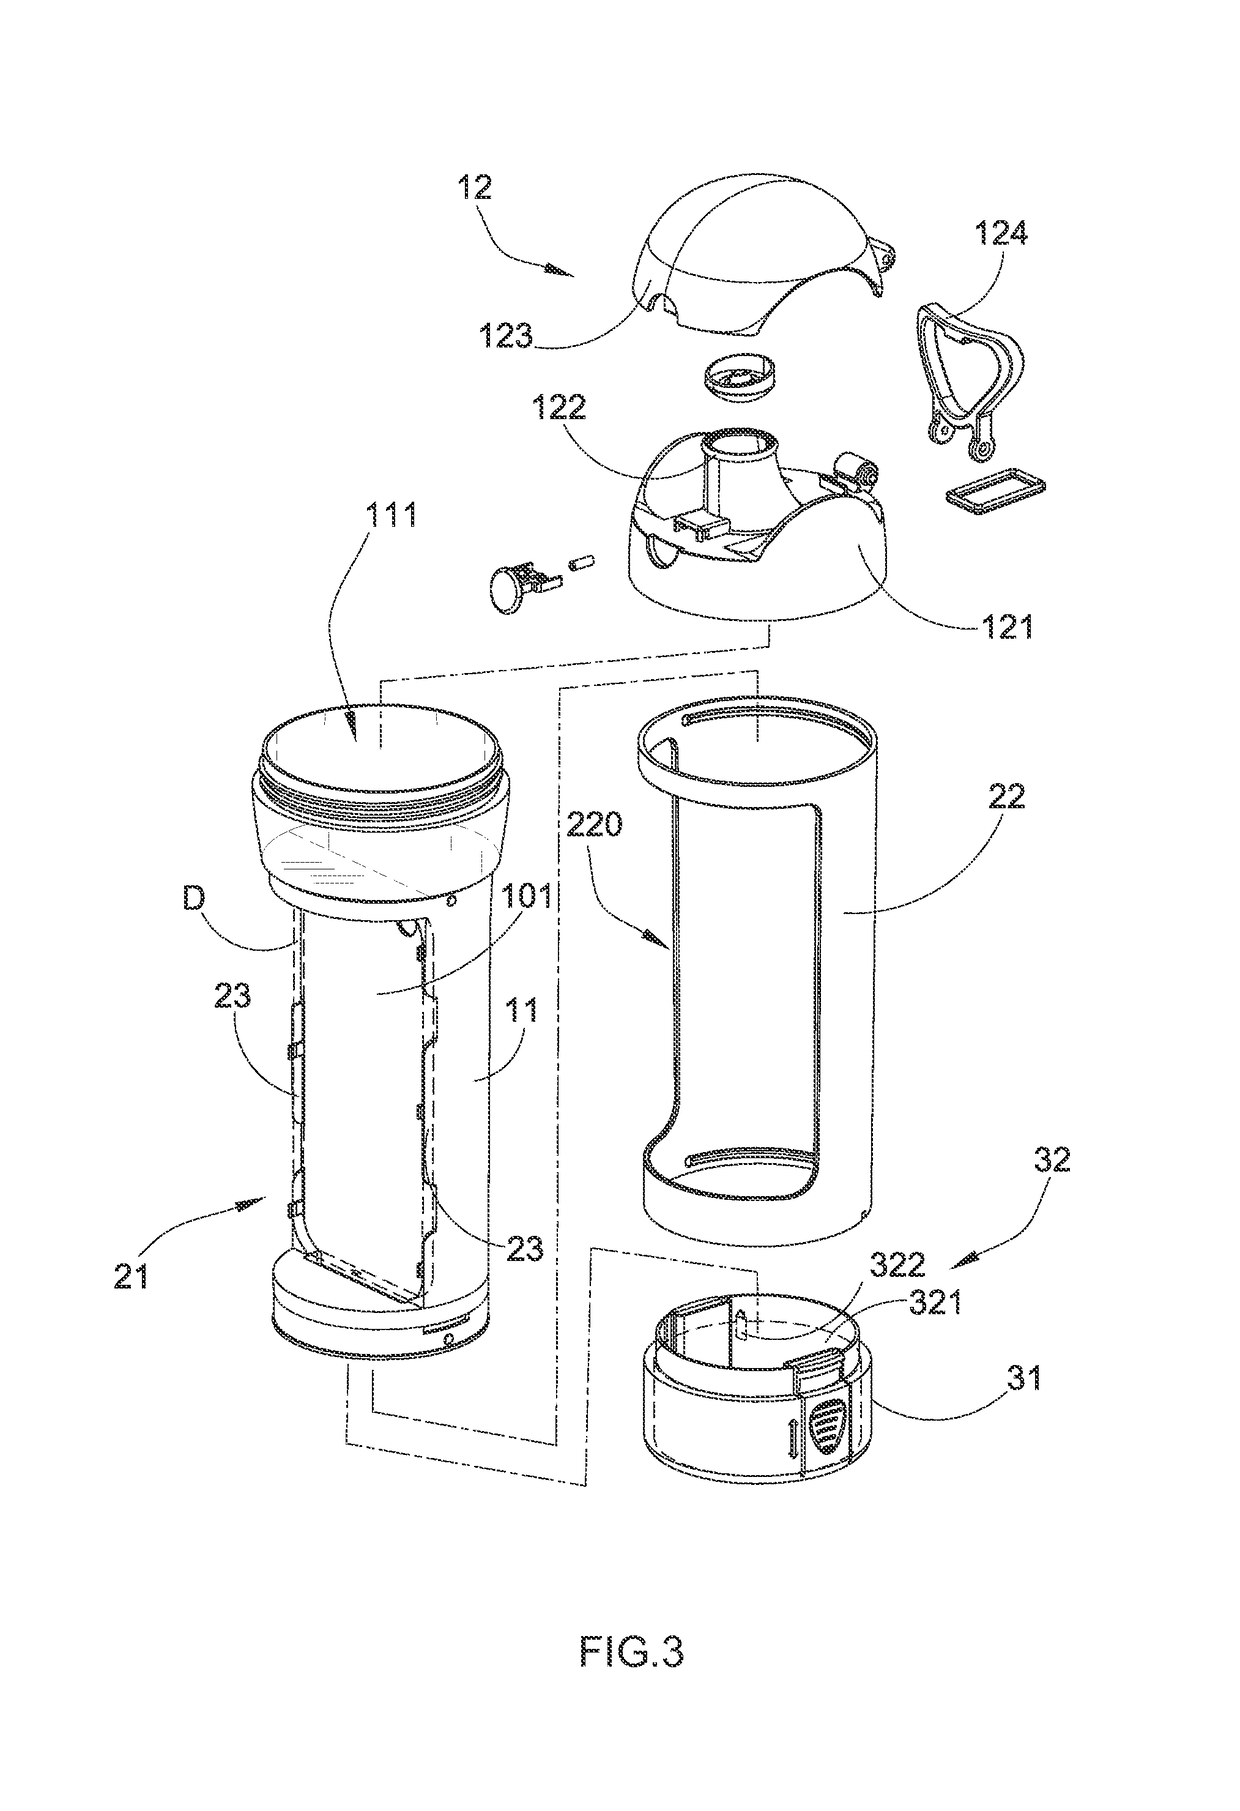 Beverage bottle with accessible station for portable electronic device